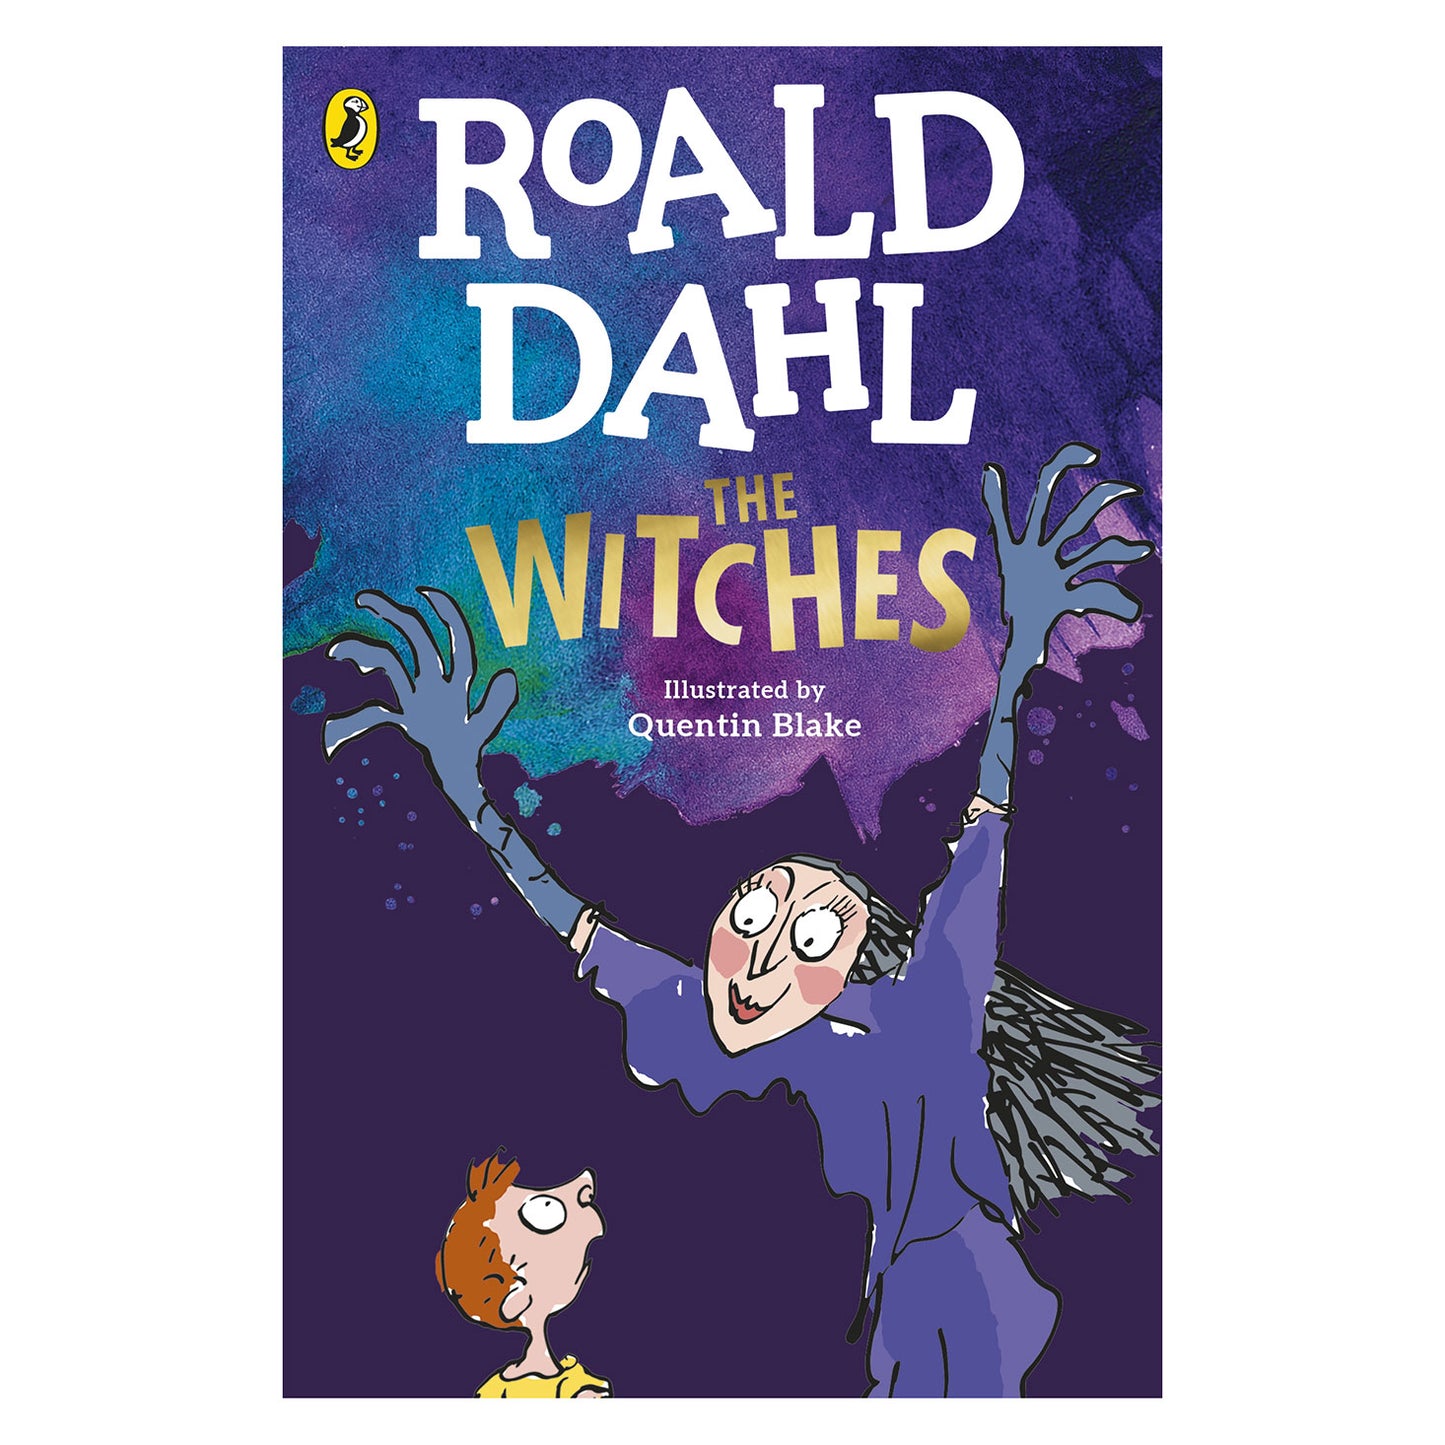 The Witches by Roald Dahl with illustrations by Quentin Blake